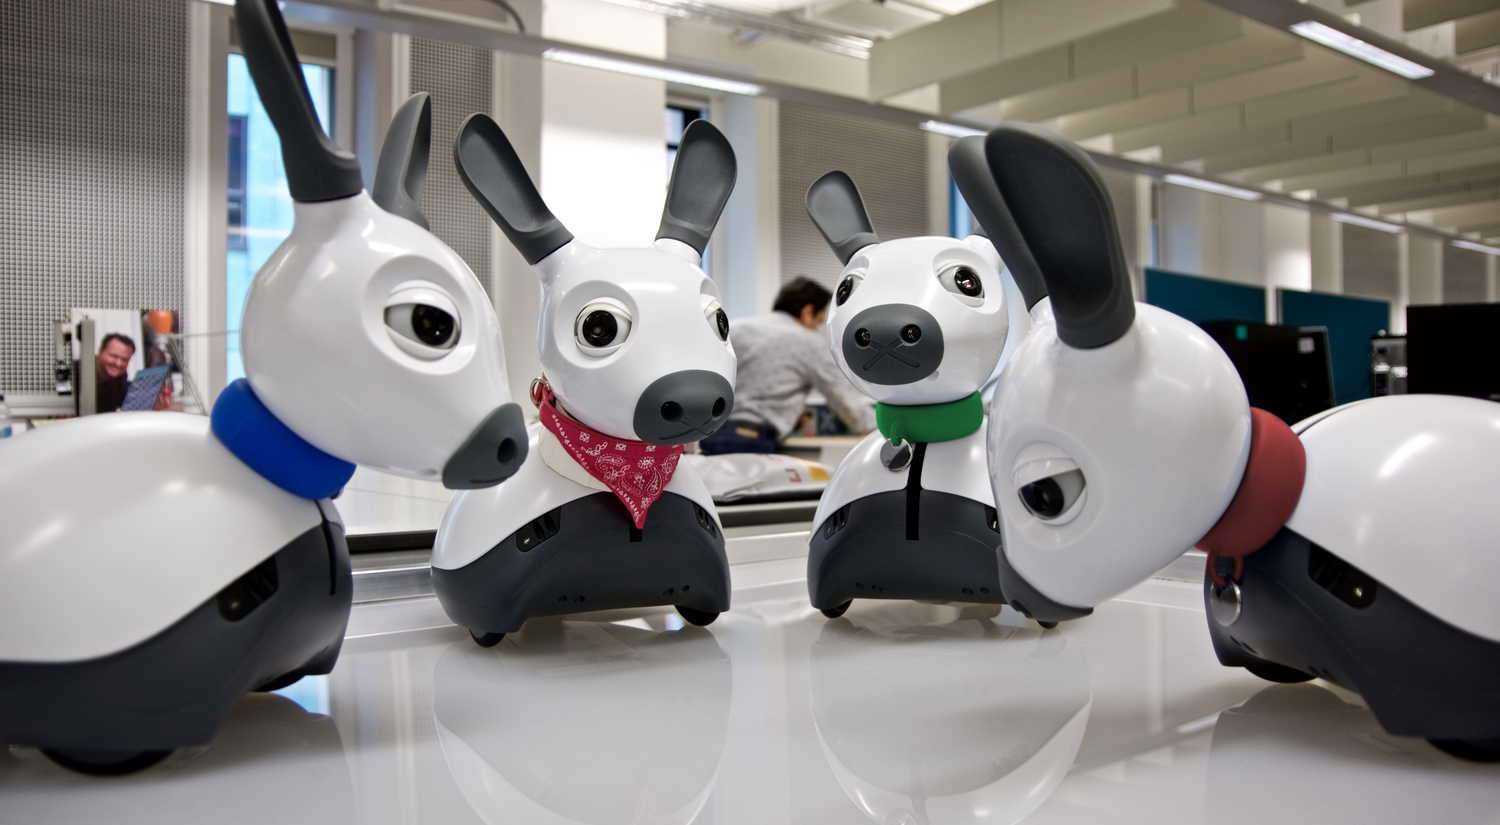 Robotic dogs will help older people